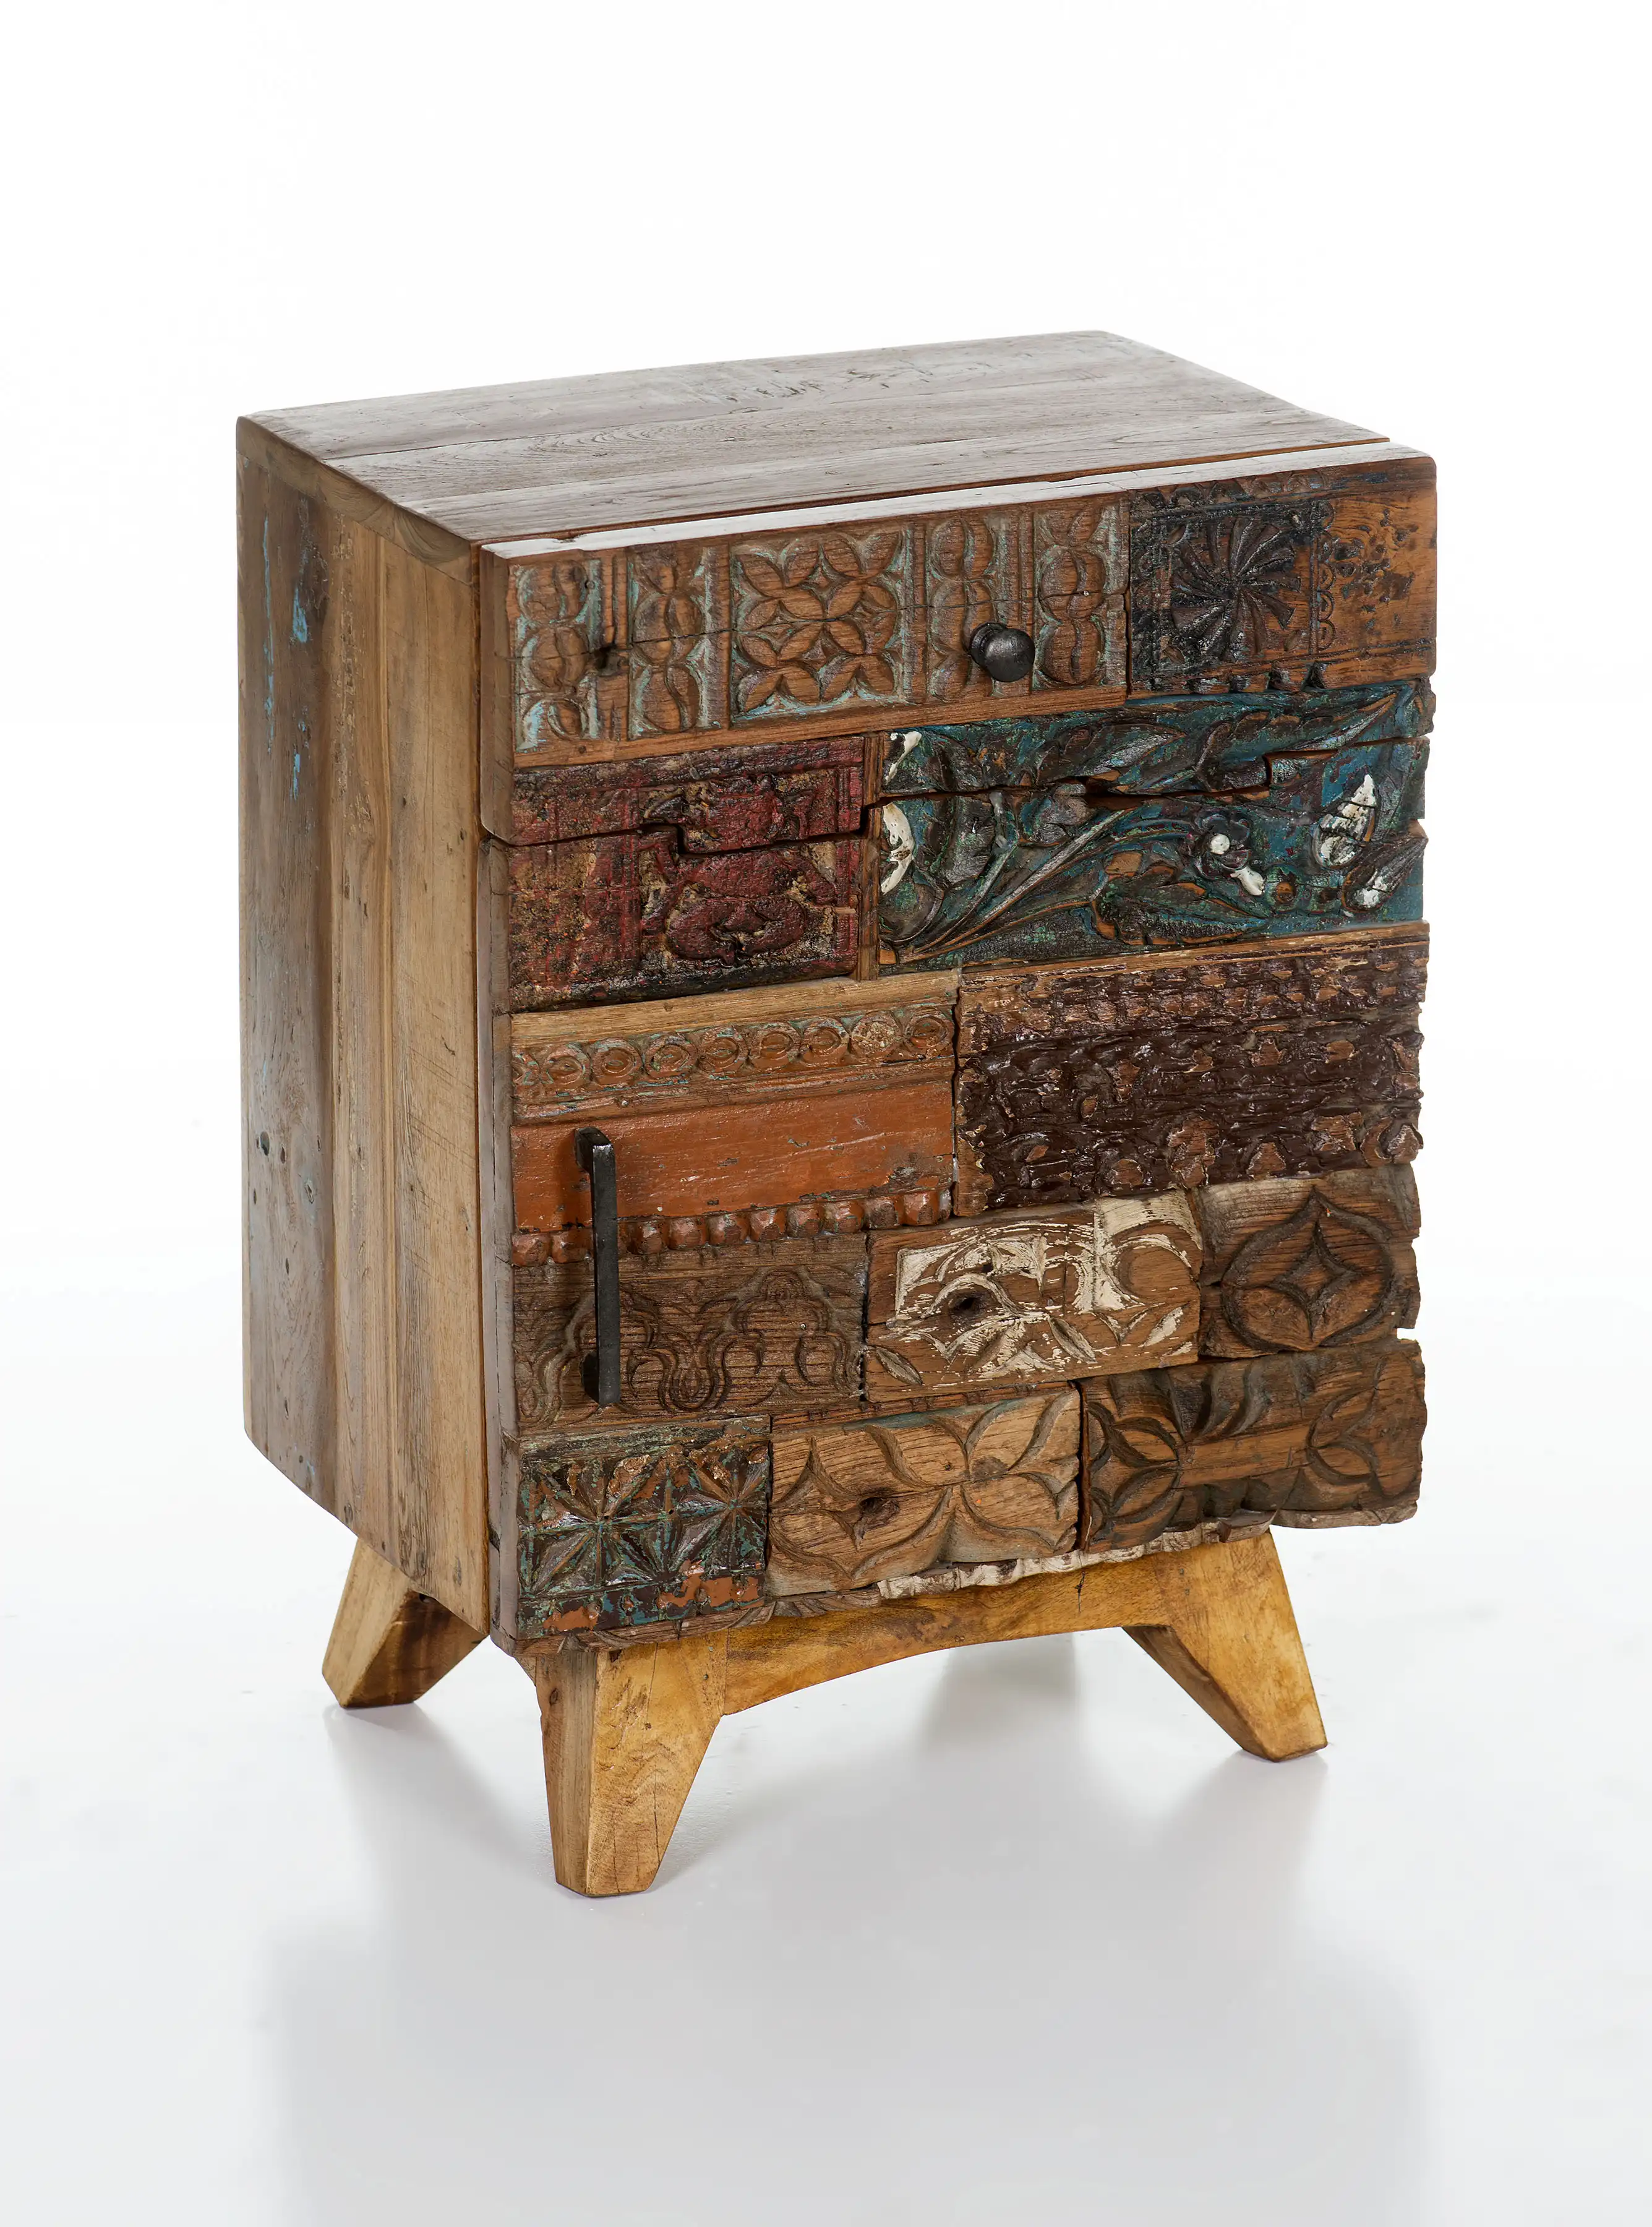 Reclaimed Wood Carved Blocks Side Table with 1 Drawer & 1 Door
(Knock Down) - popular handicrafts